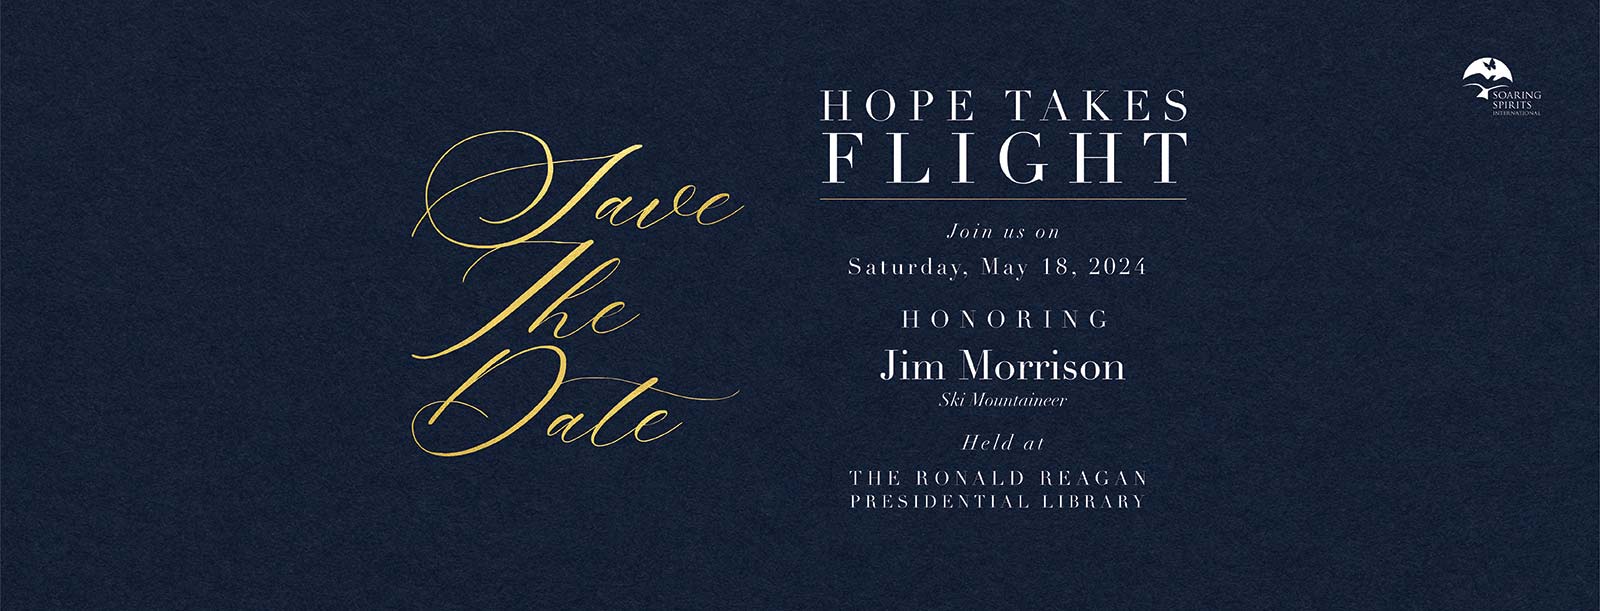 Hope Takes Flight 2024 - Save the Date